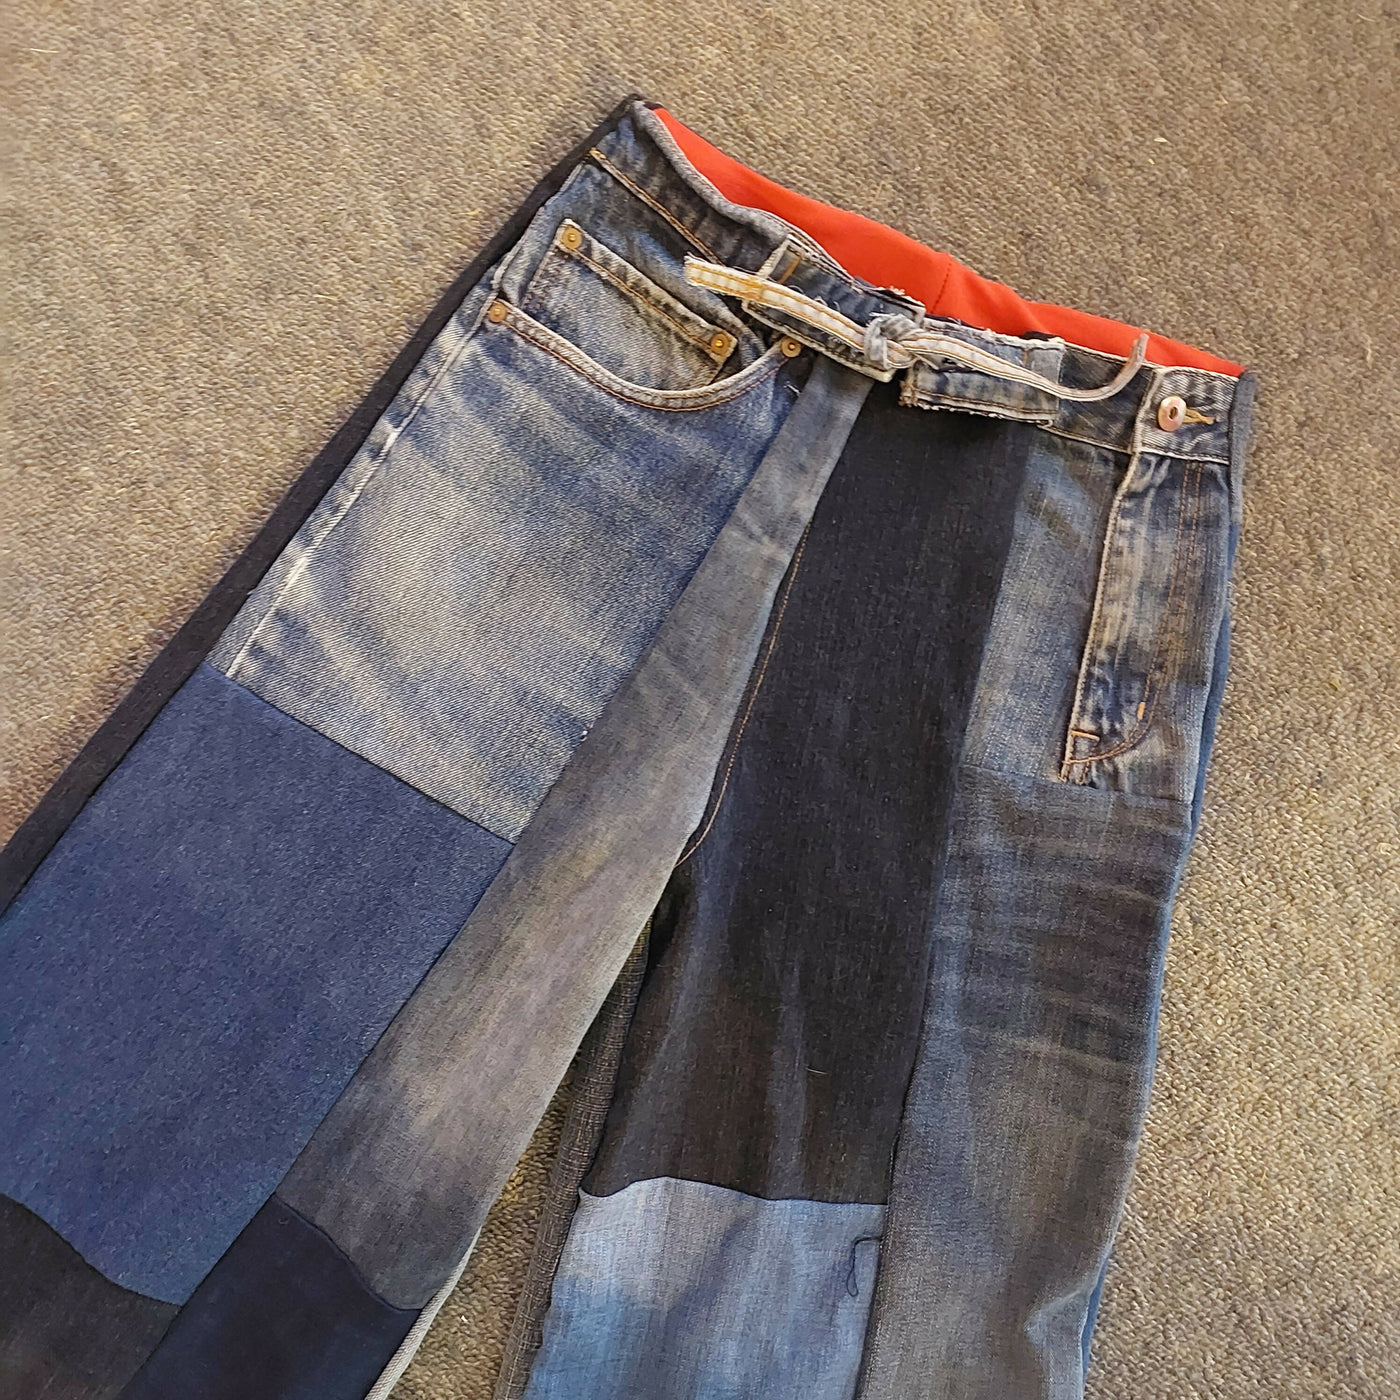 Patchwork Upcycled Denim Jeans